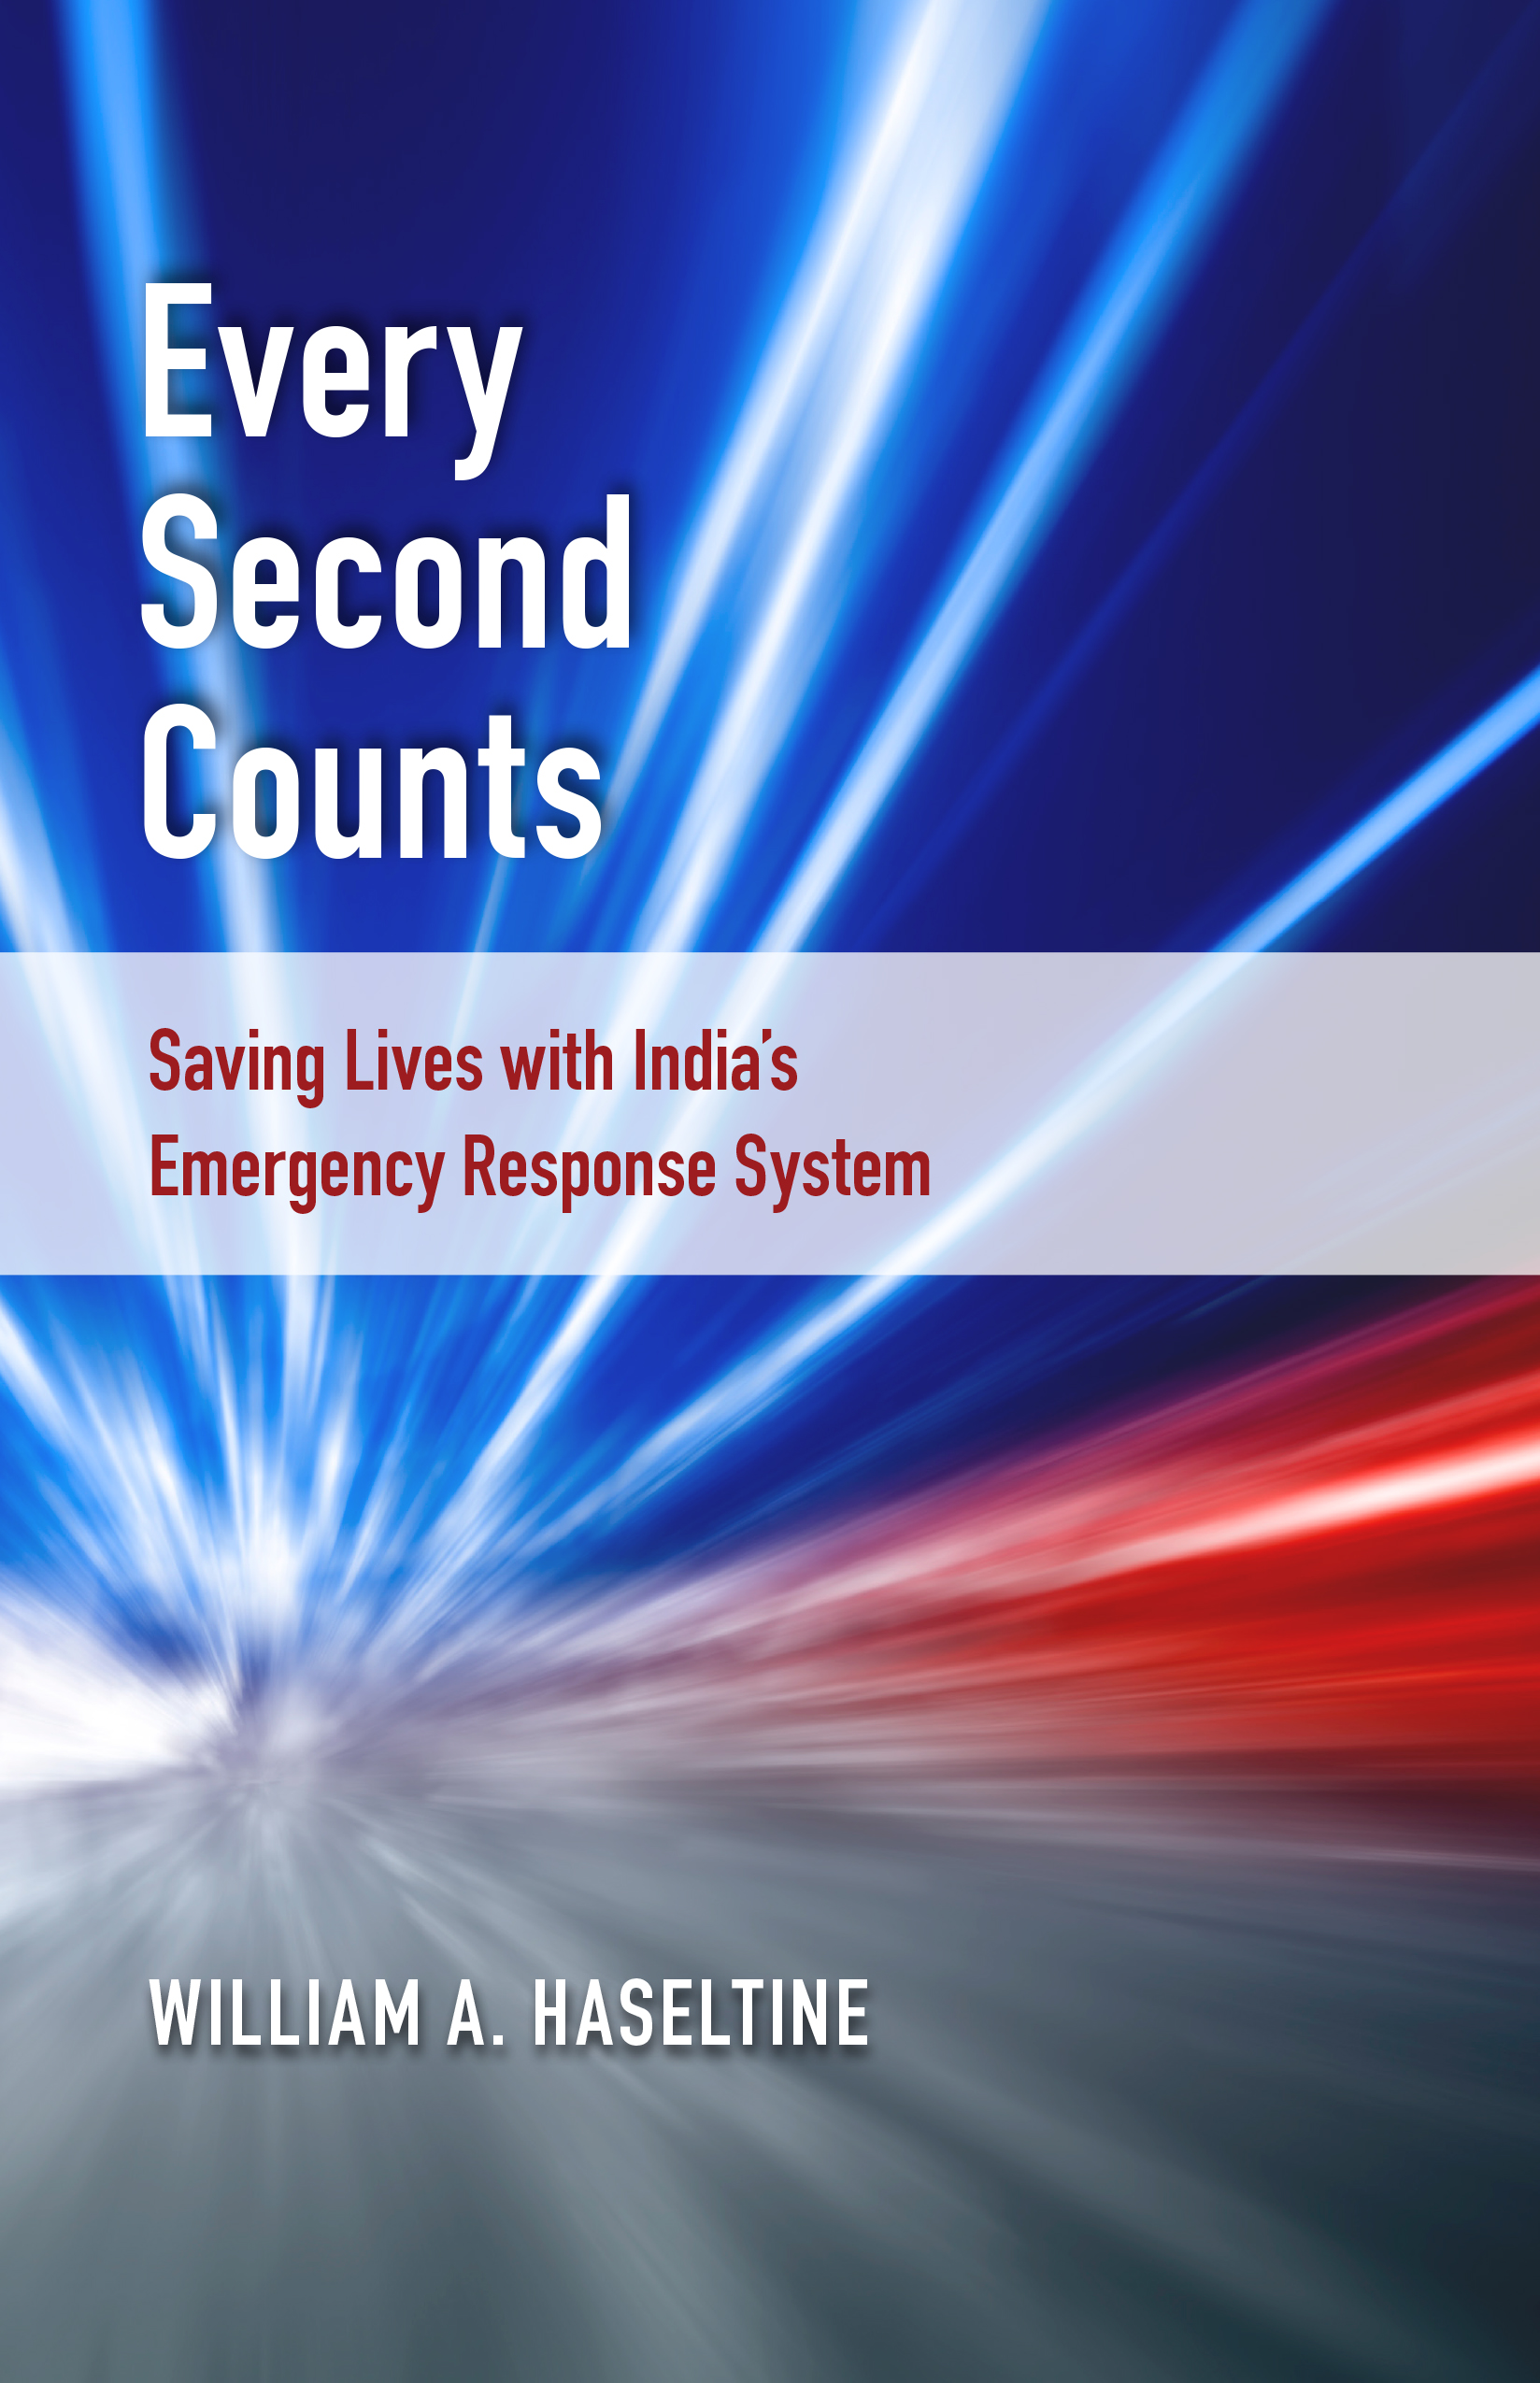 Every Second Counts: Saving Lives with India's Emergency Response System